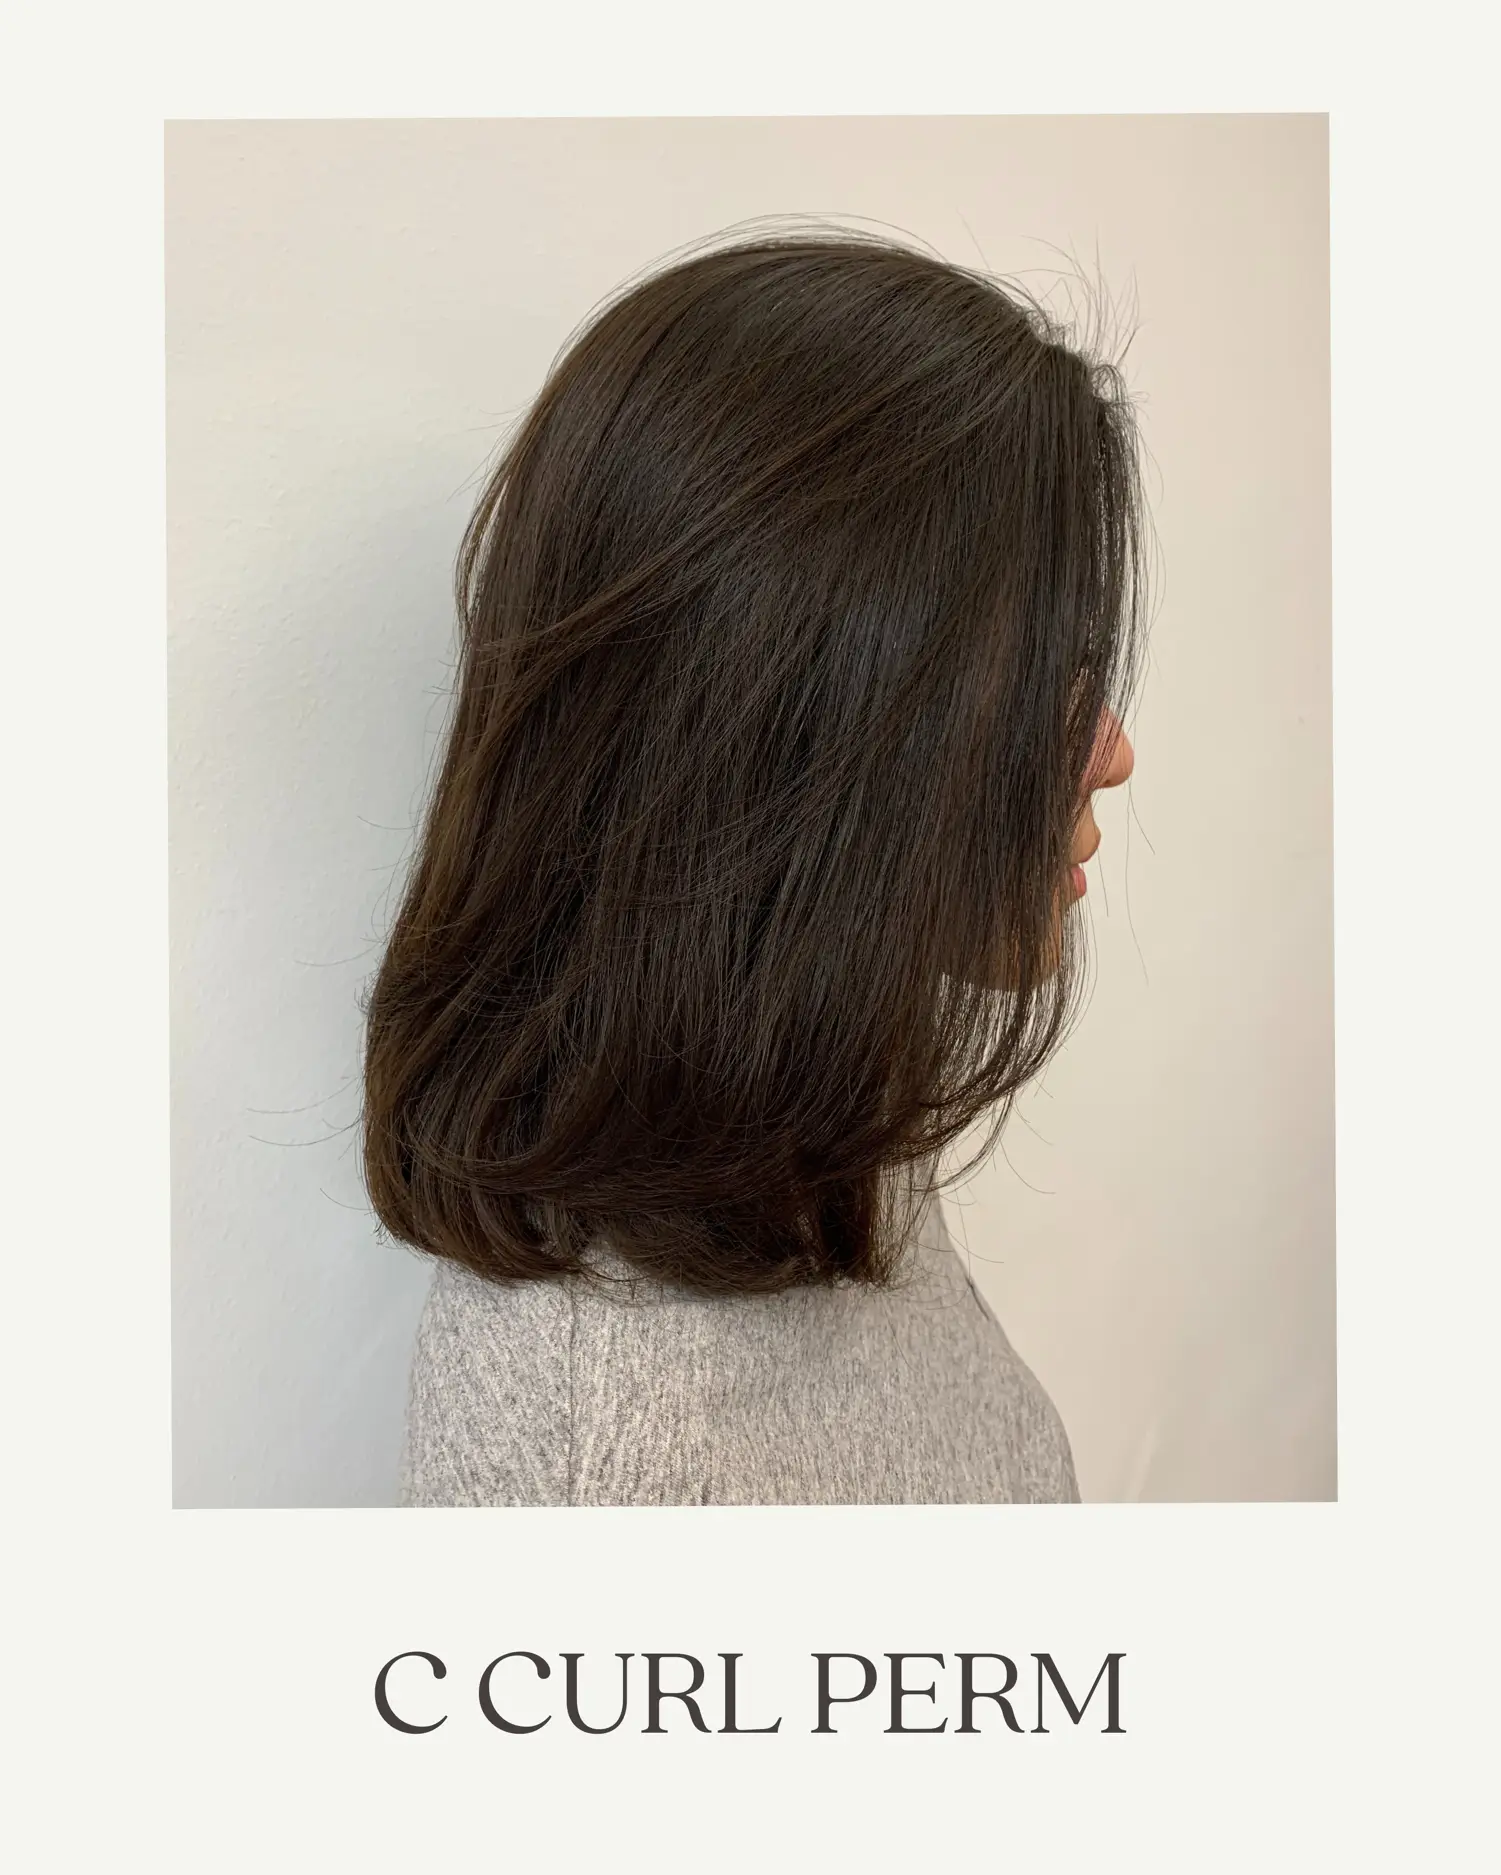 5 ways to perm short and mid-length hair that will have you